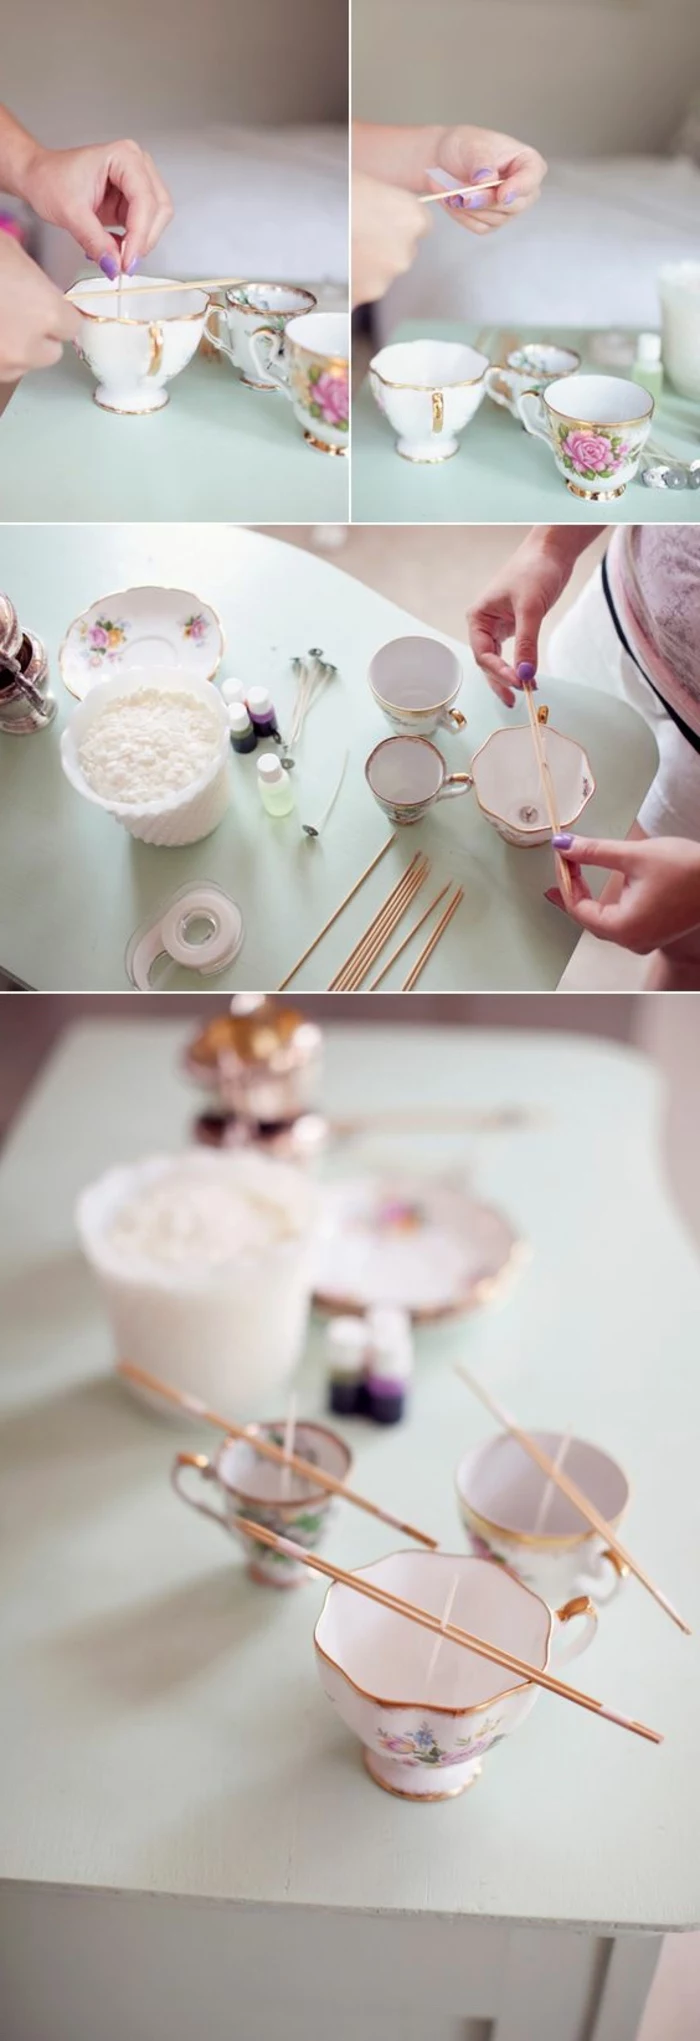 step by step, diy tutorial, how to make candles, vintage teacups, filled with candle wax